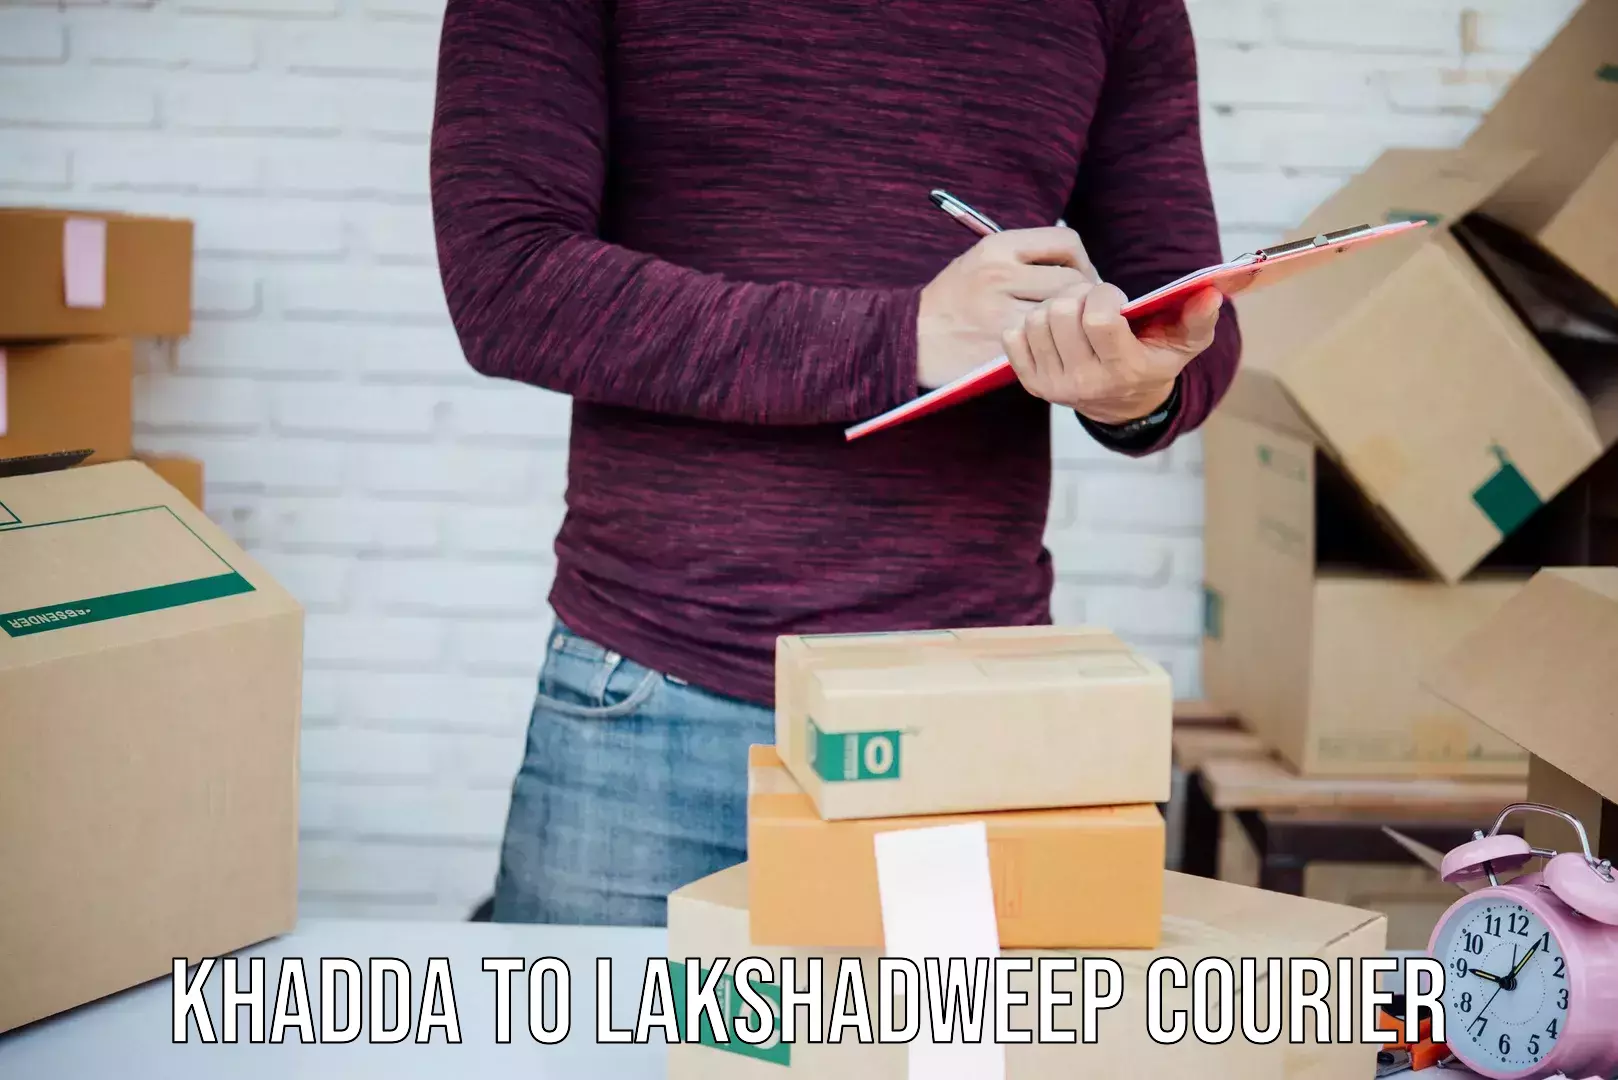 State-of-the-art courier technology Khadda to Lakshadweep